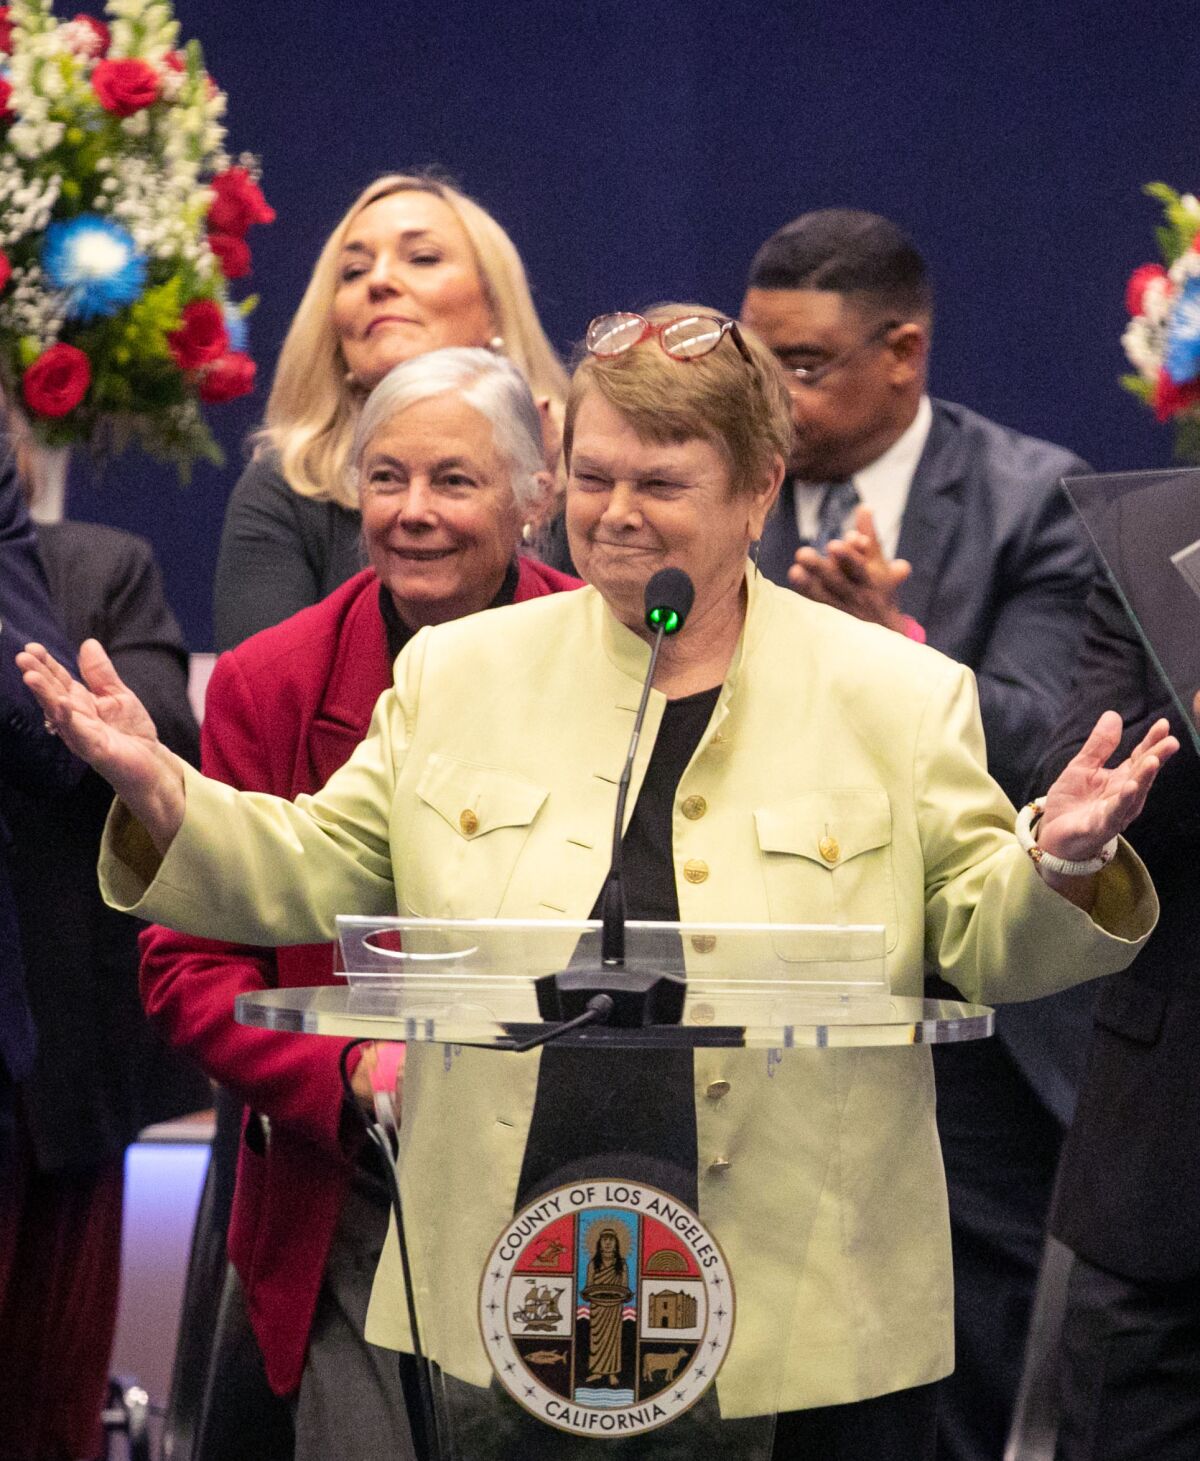 Sheila Kuehl smiles at a lectern and raises her hands while colleagues stand behind her.